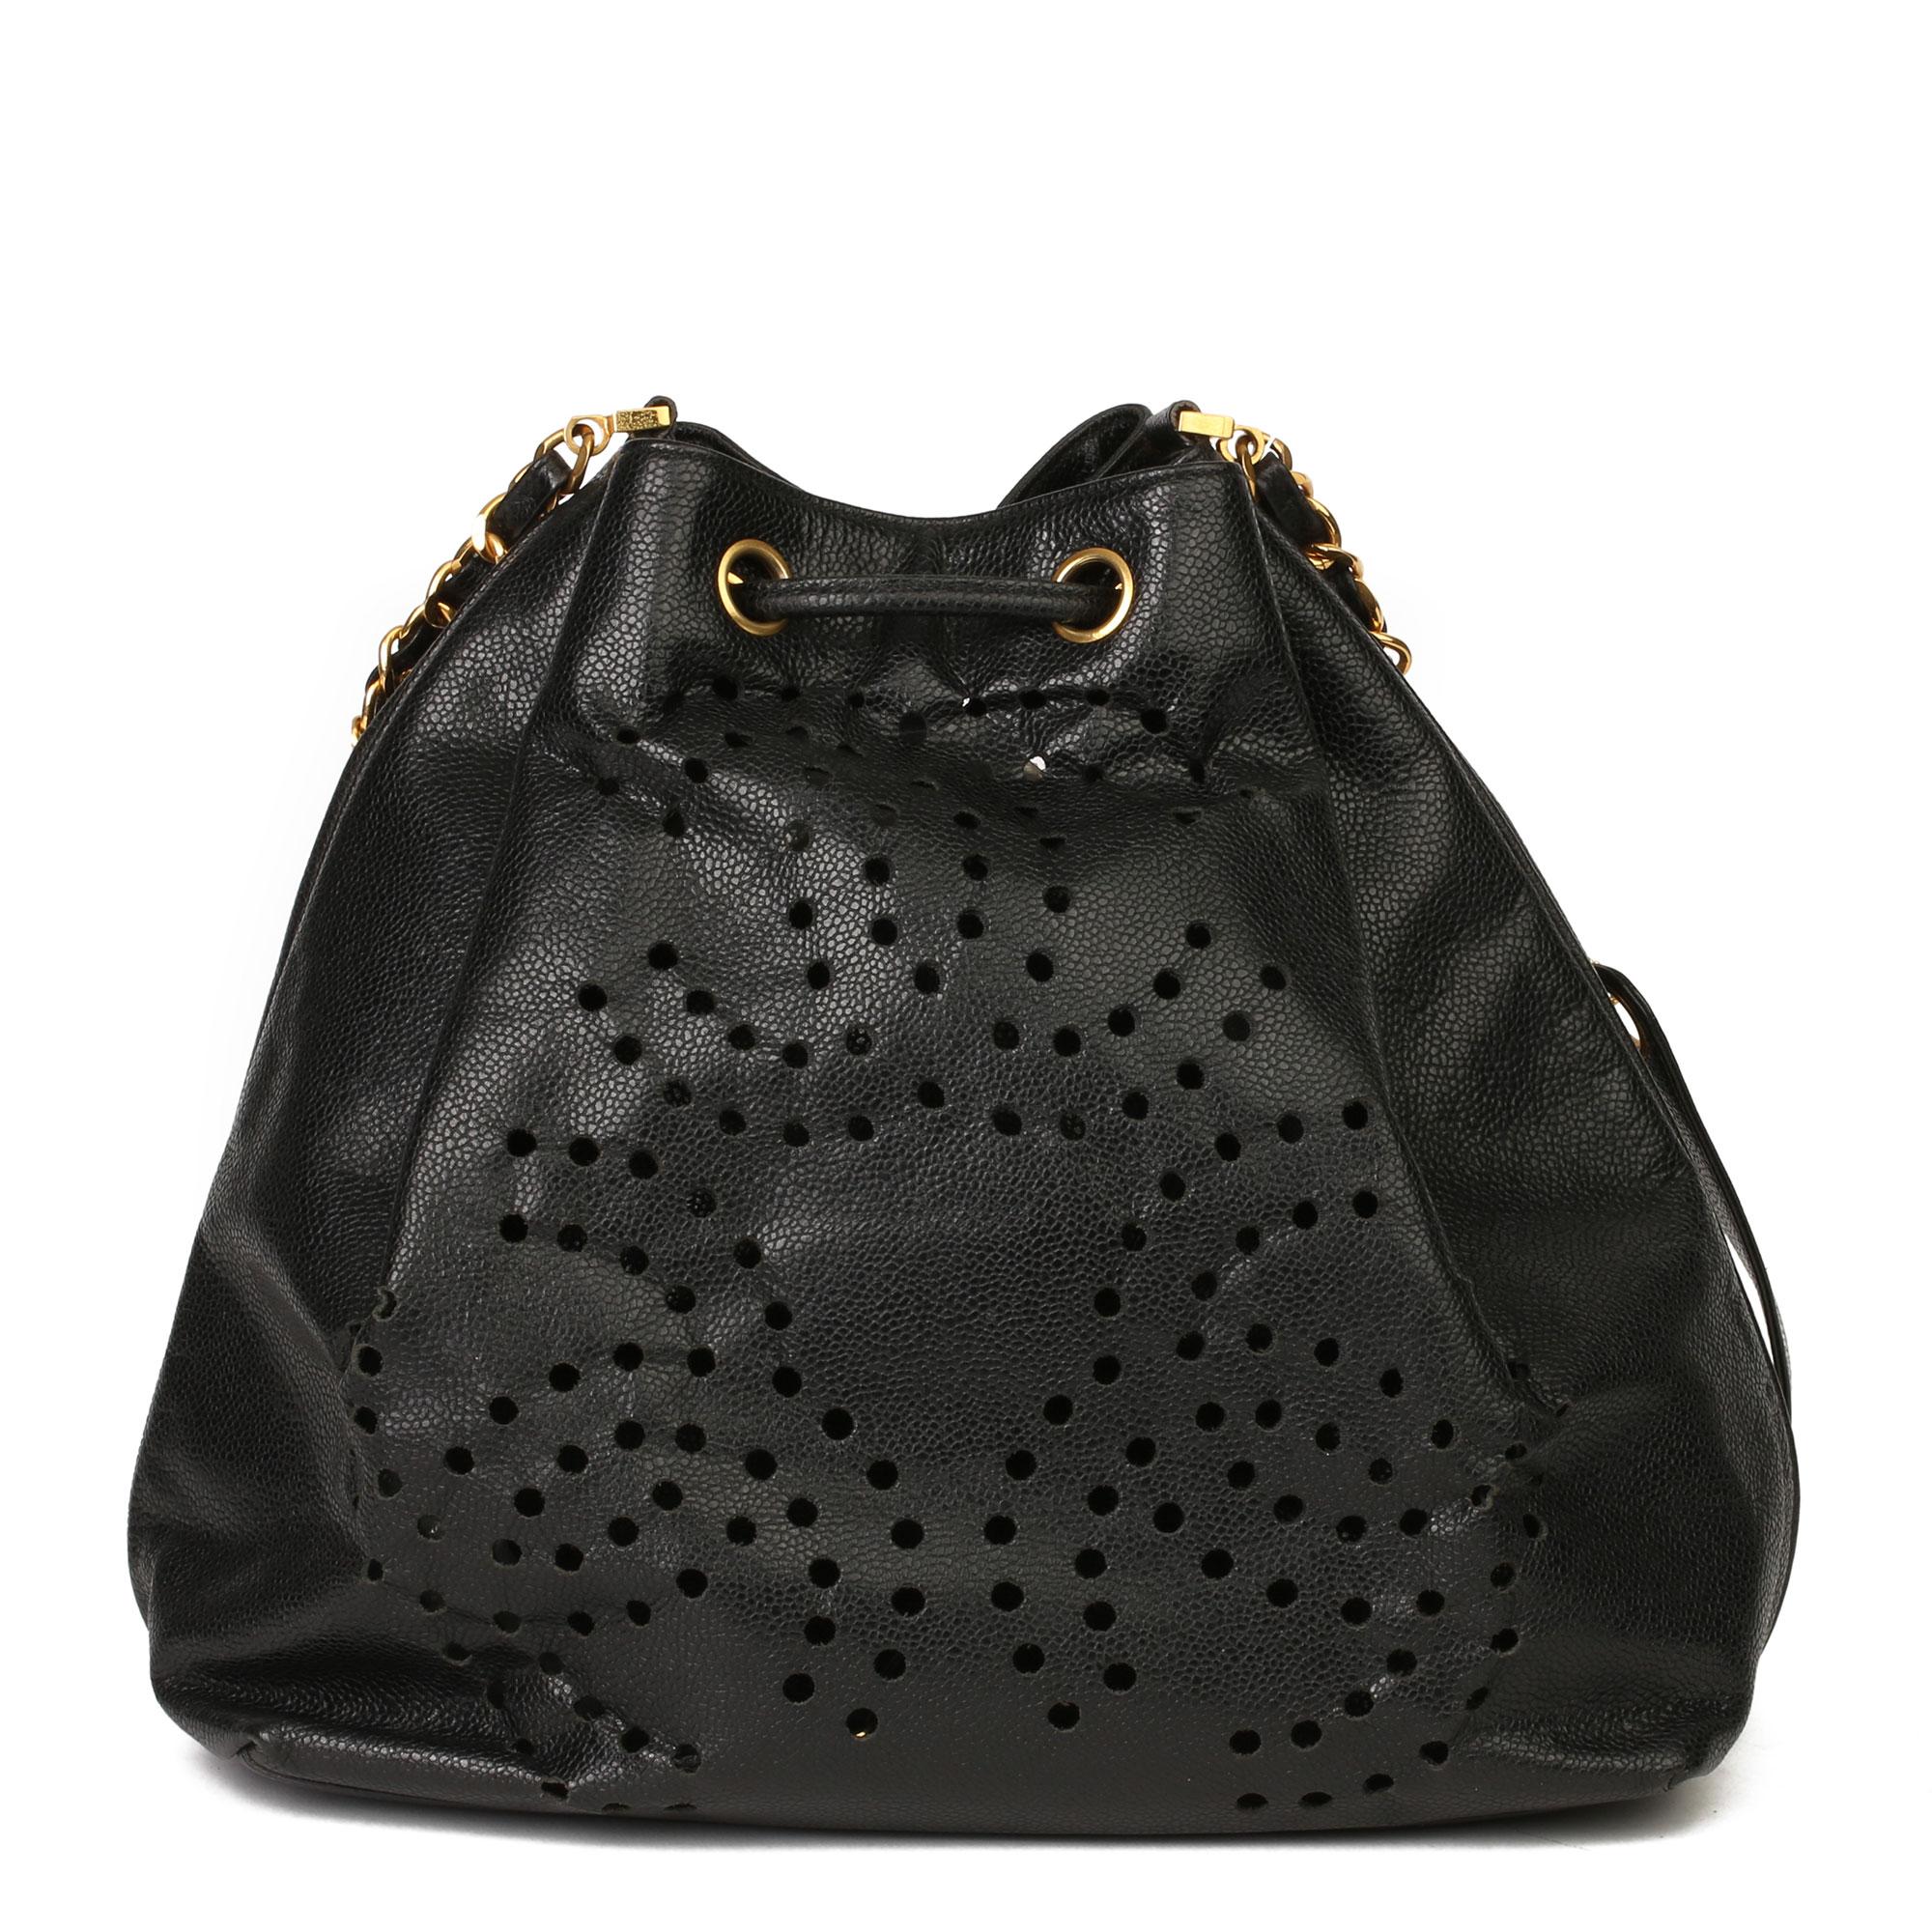 Women's Chanel Black CC Perforated Caviar Leather Vintage Timeless Bucket Bag